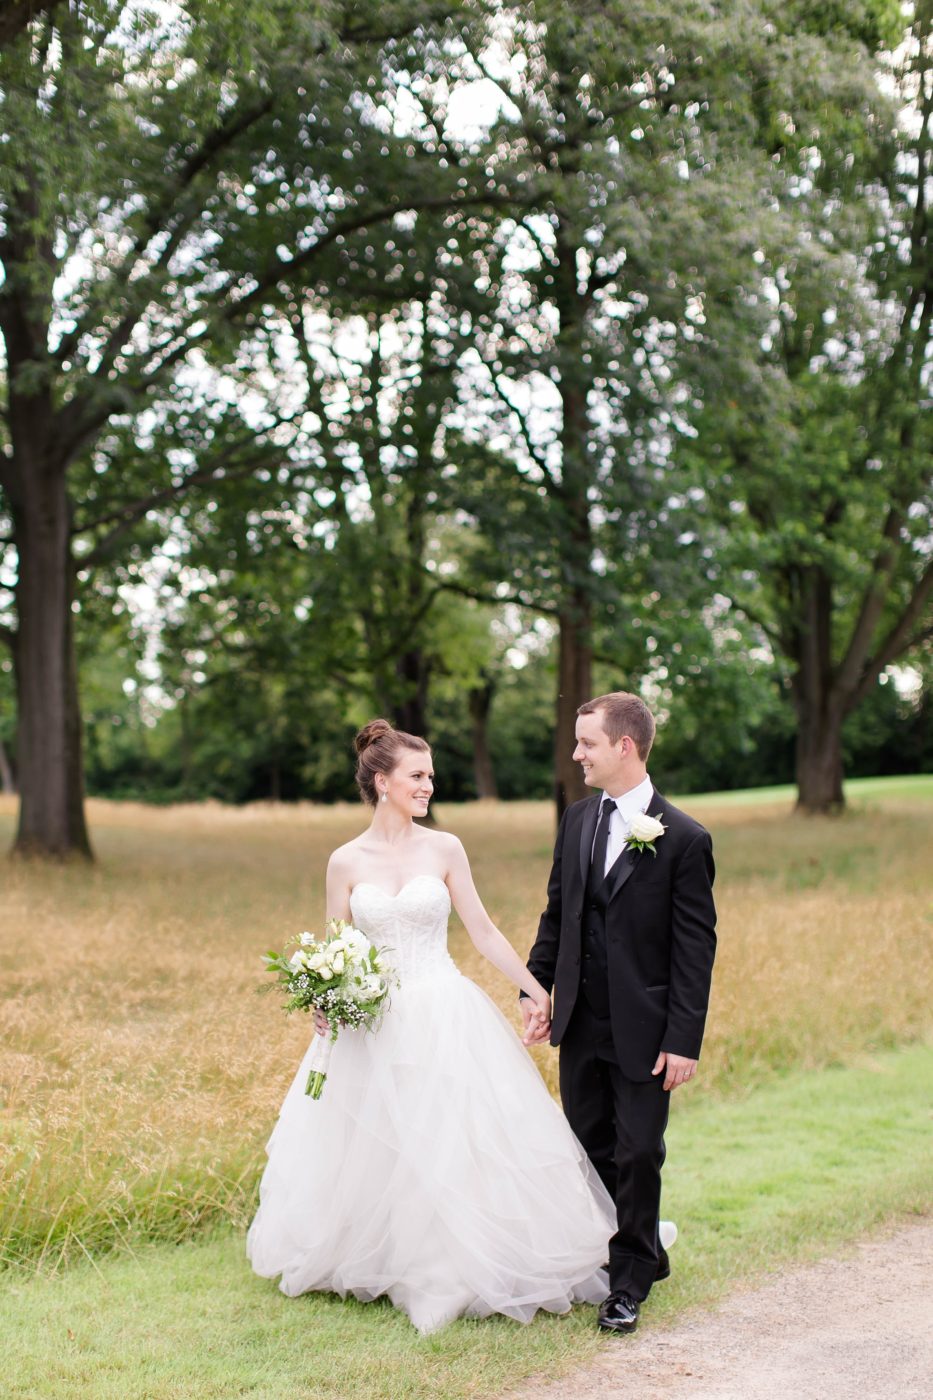 Bride and Groom holding hands while walking and laughing together in a field.